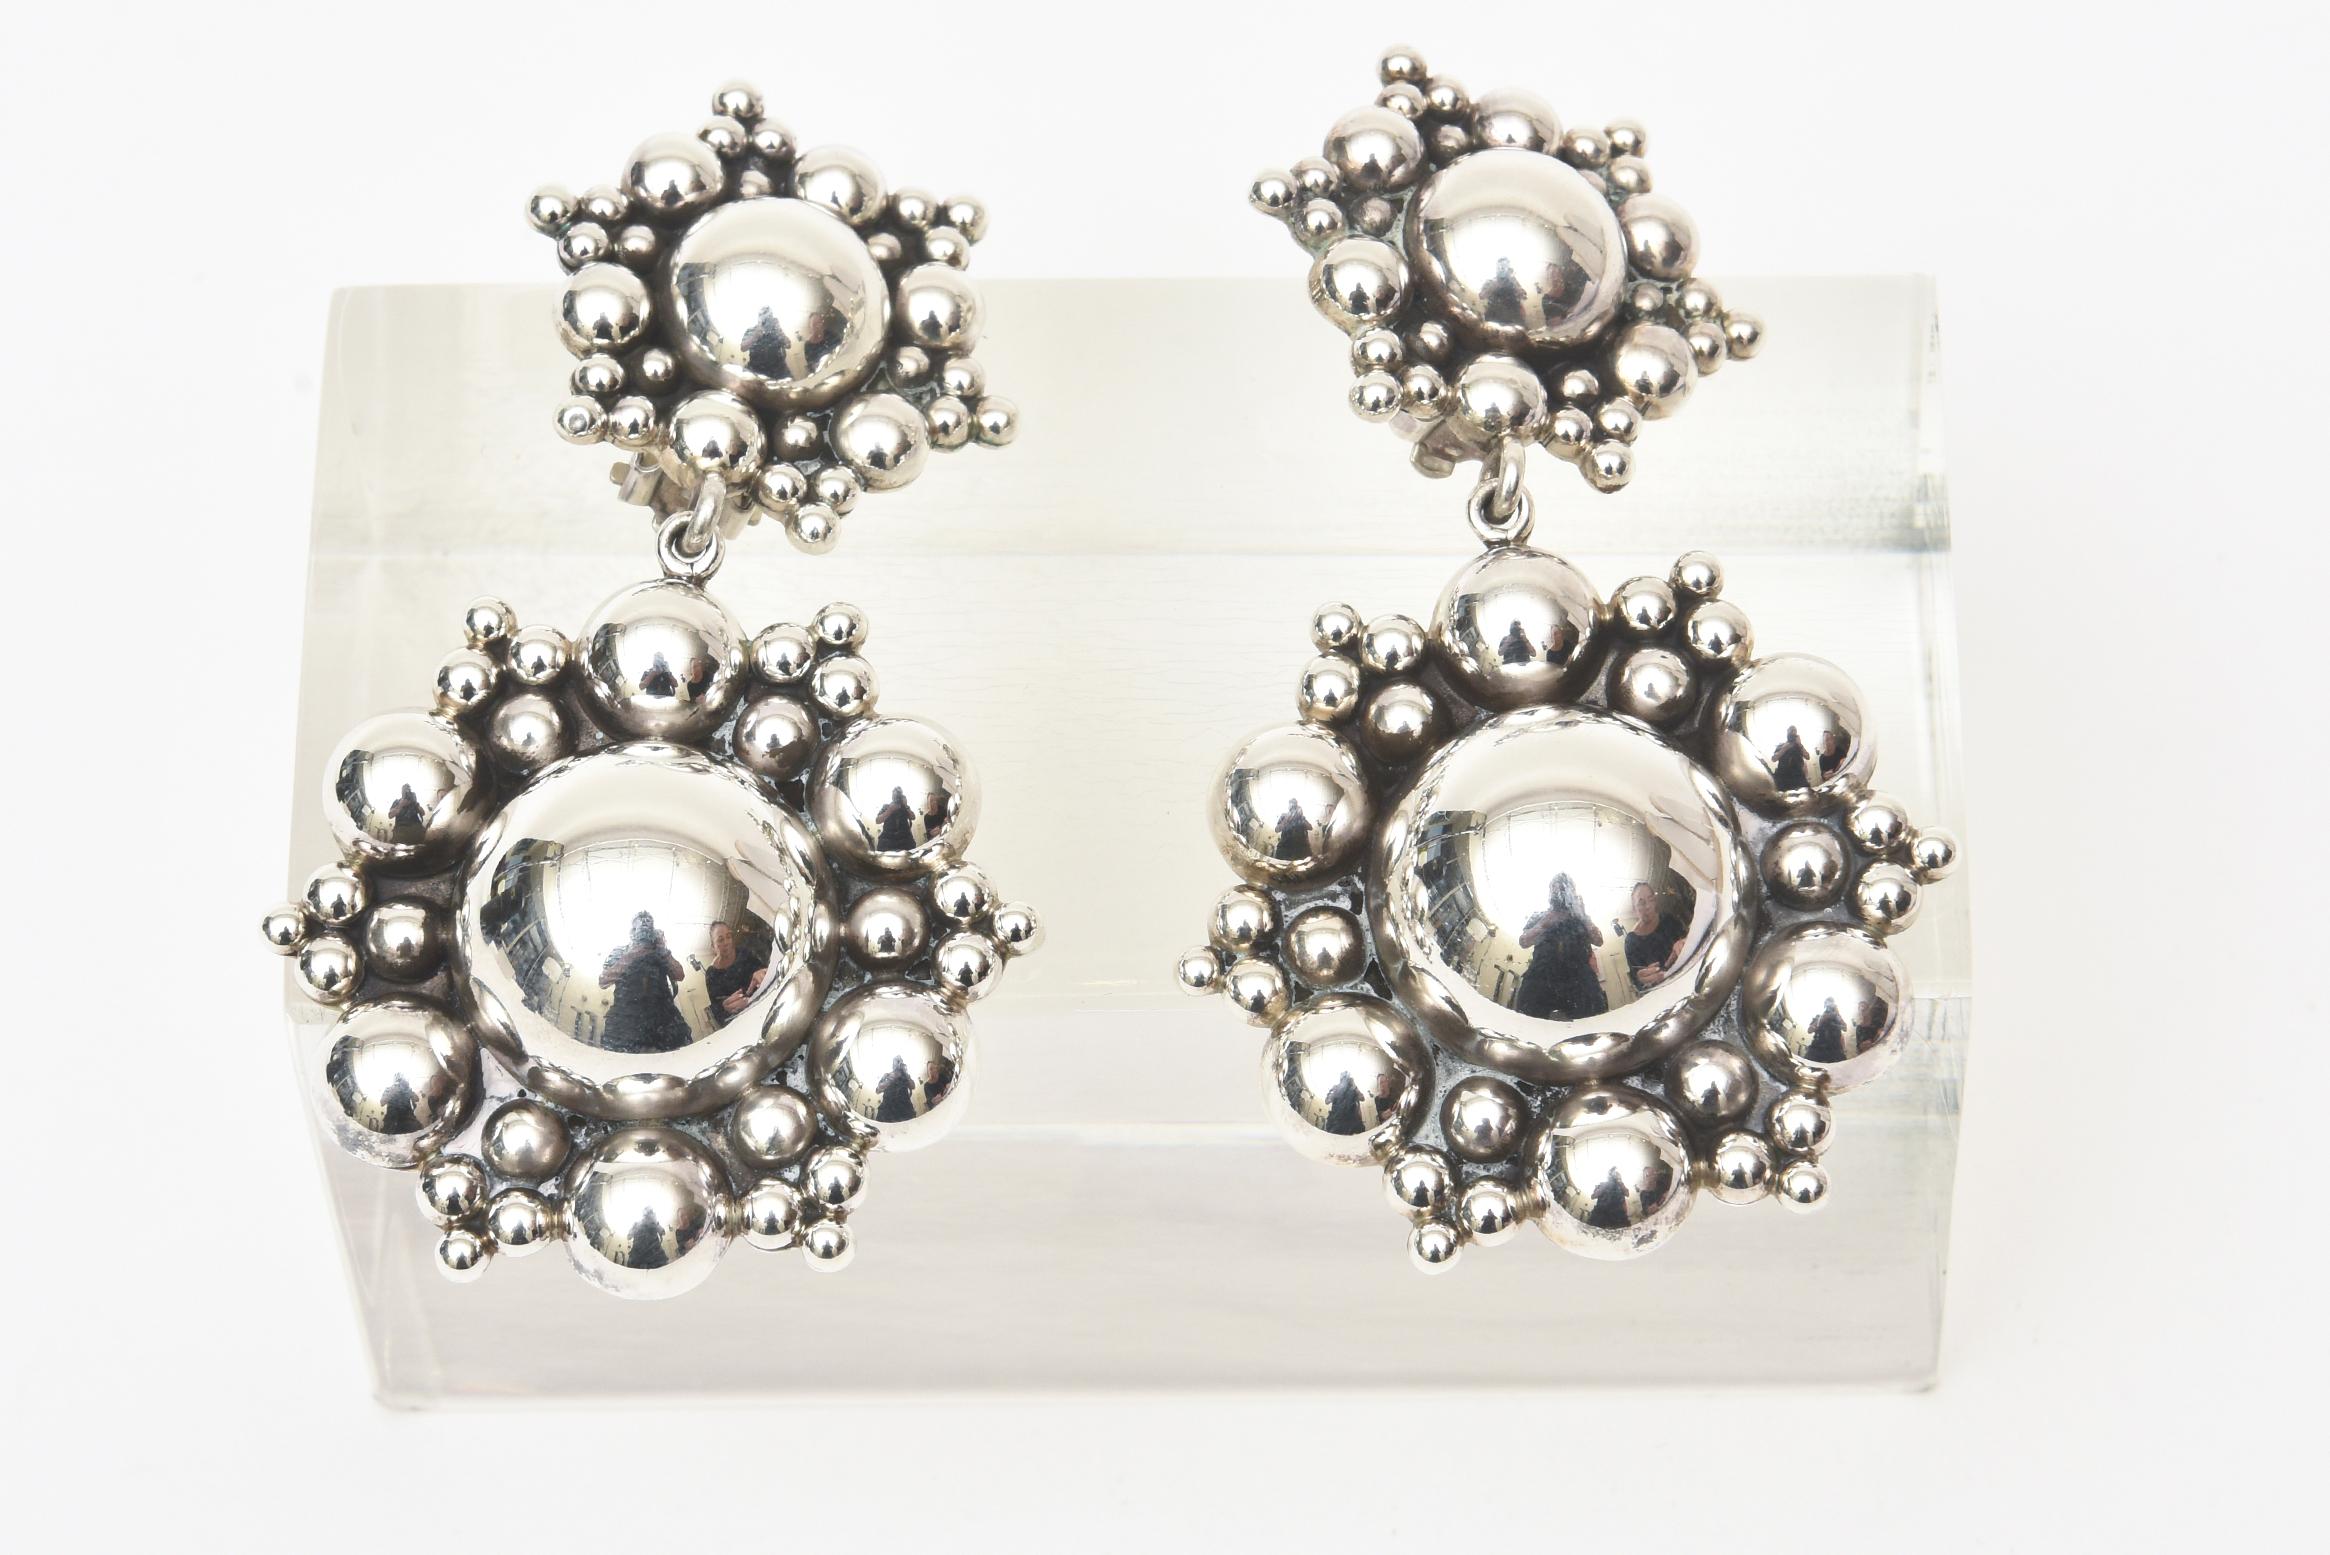 These stunning and dramatic never worn sterling silver dangle clip on earrings were originally from Neiman Marcus from the 80's. They have a great presence and will be a statement on your ears. They have a great cluster ball form at the top and